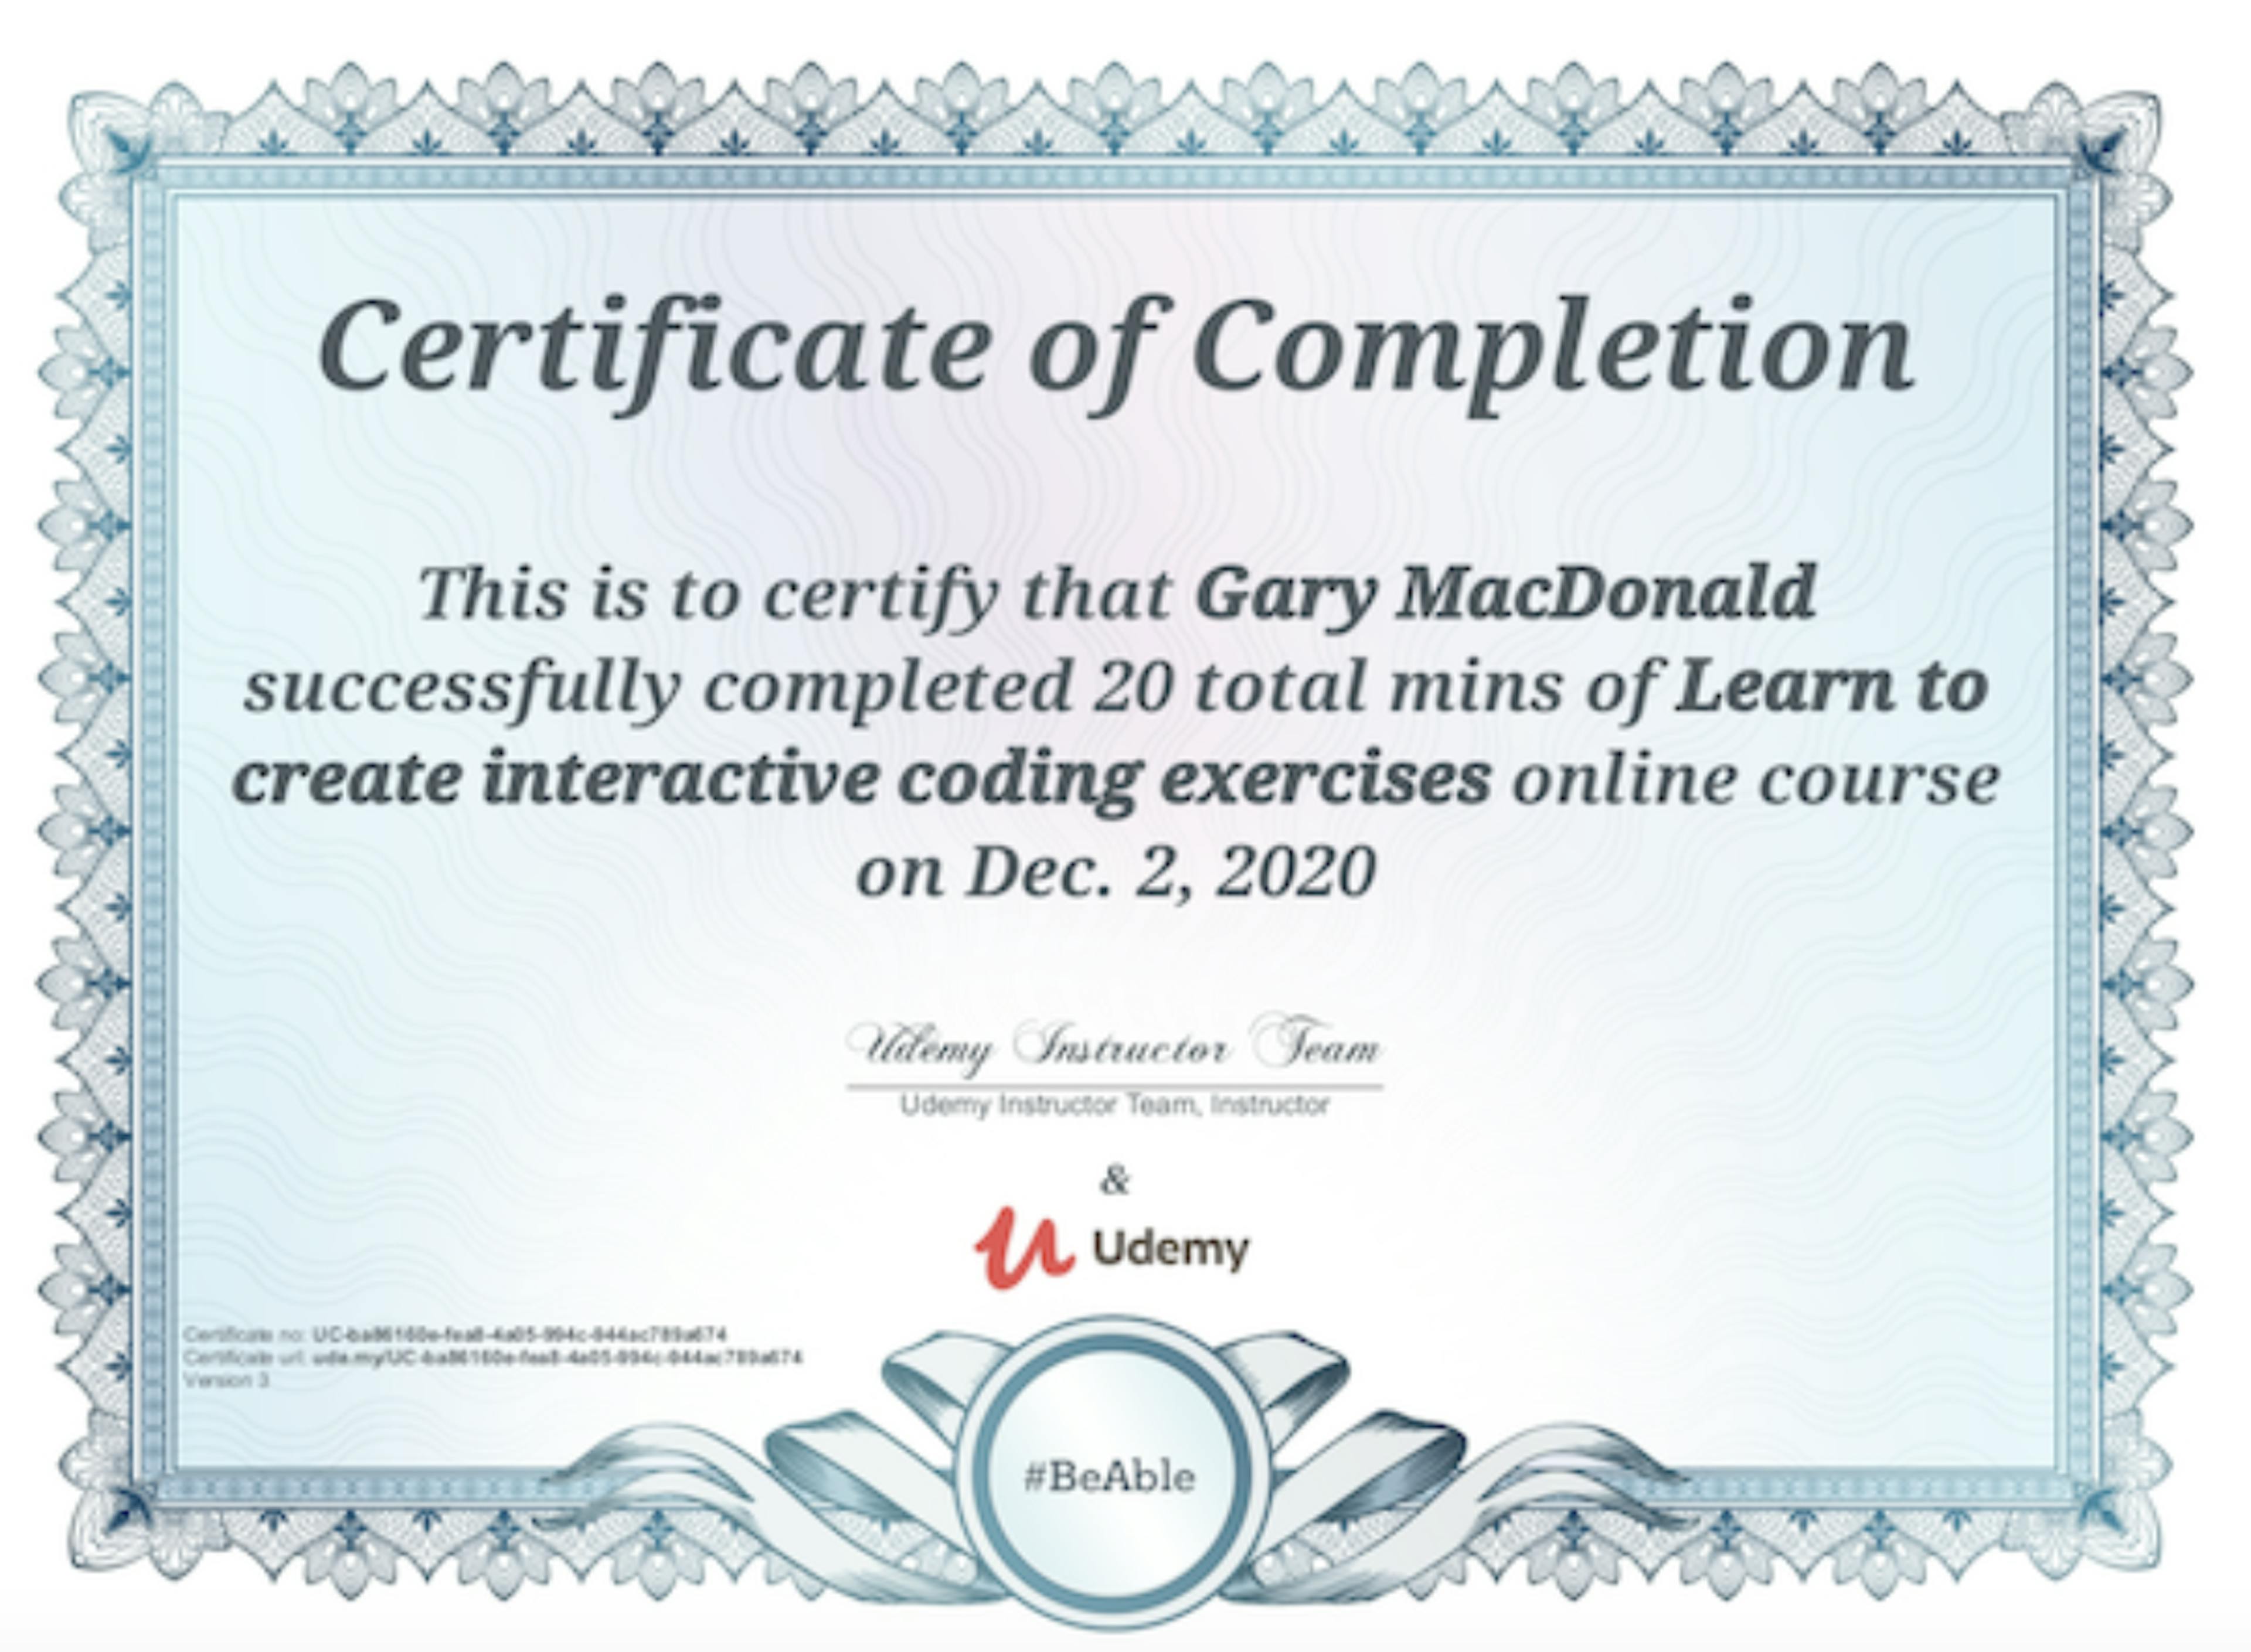 Udemy course completion certificate. Image: Udemy Support